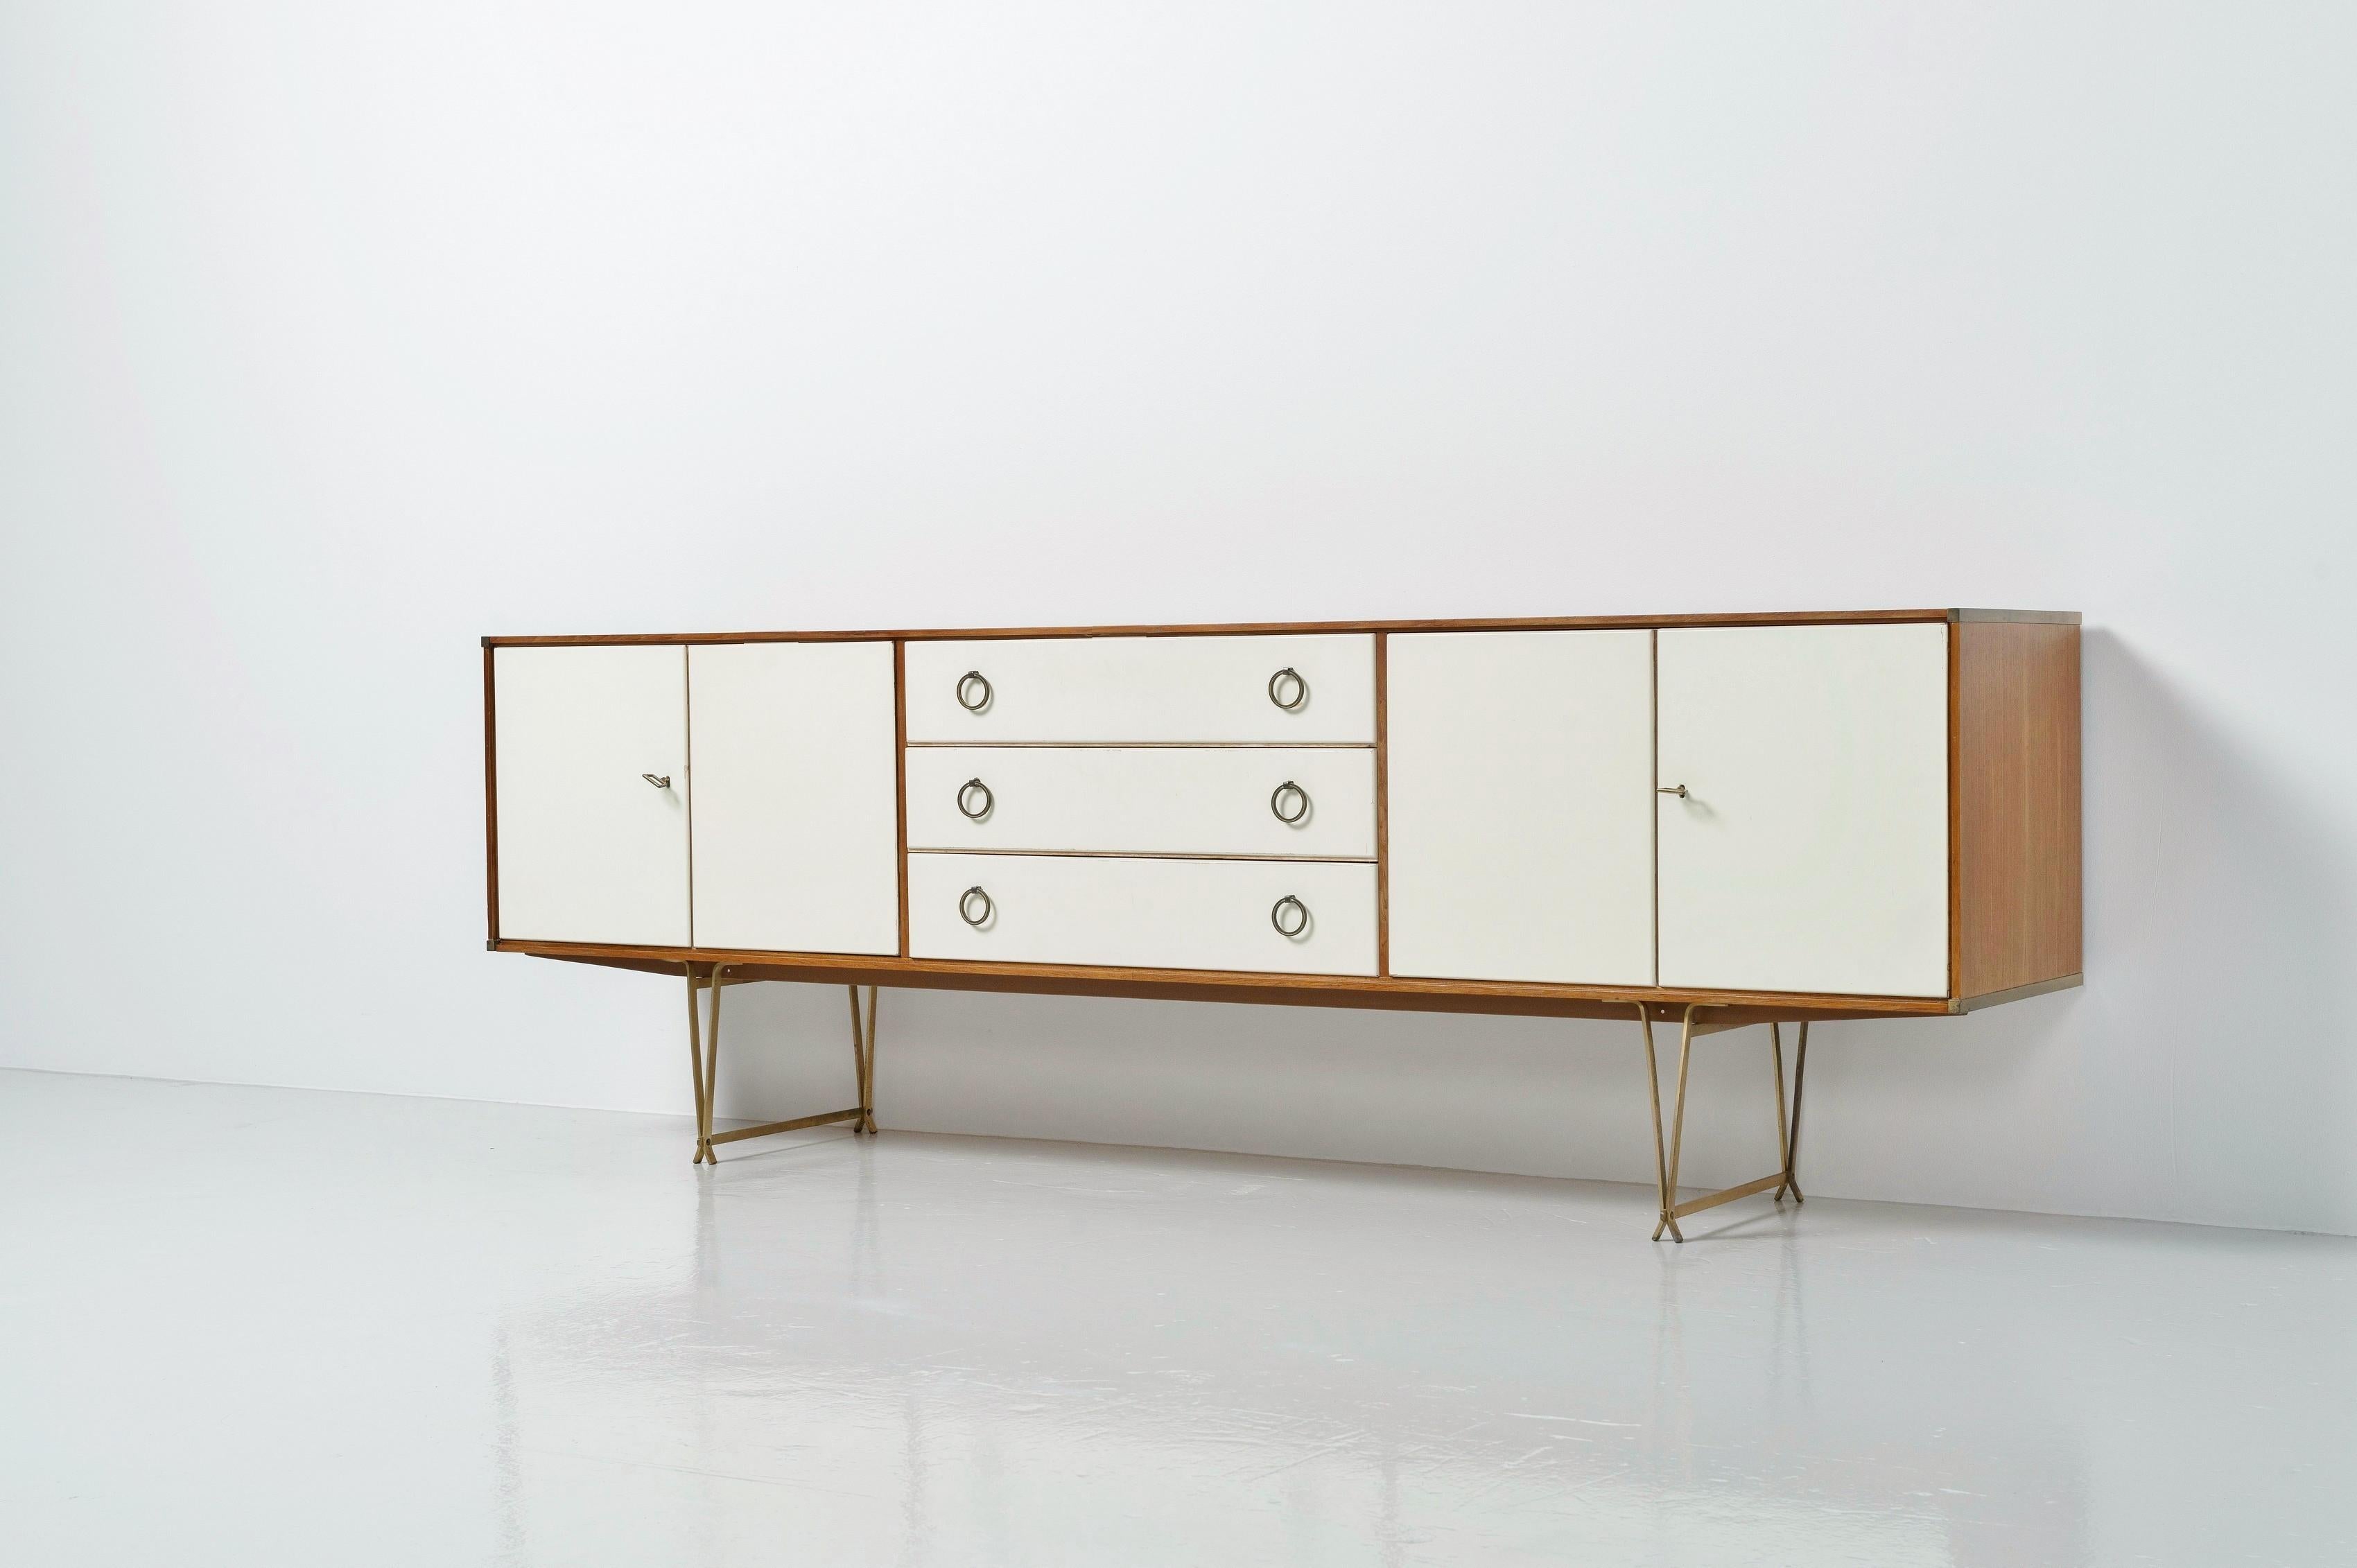 Cold-Painted William Watting Long Sideboard Fristho Franeker, 1954